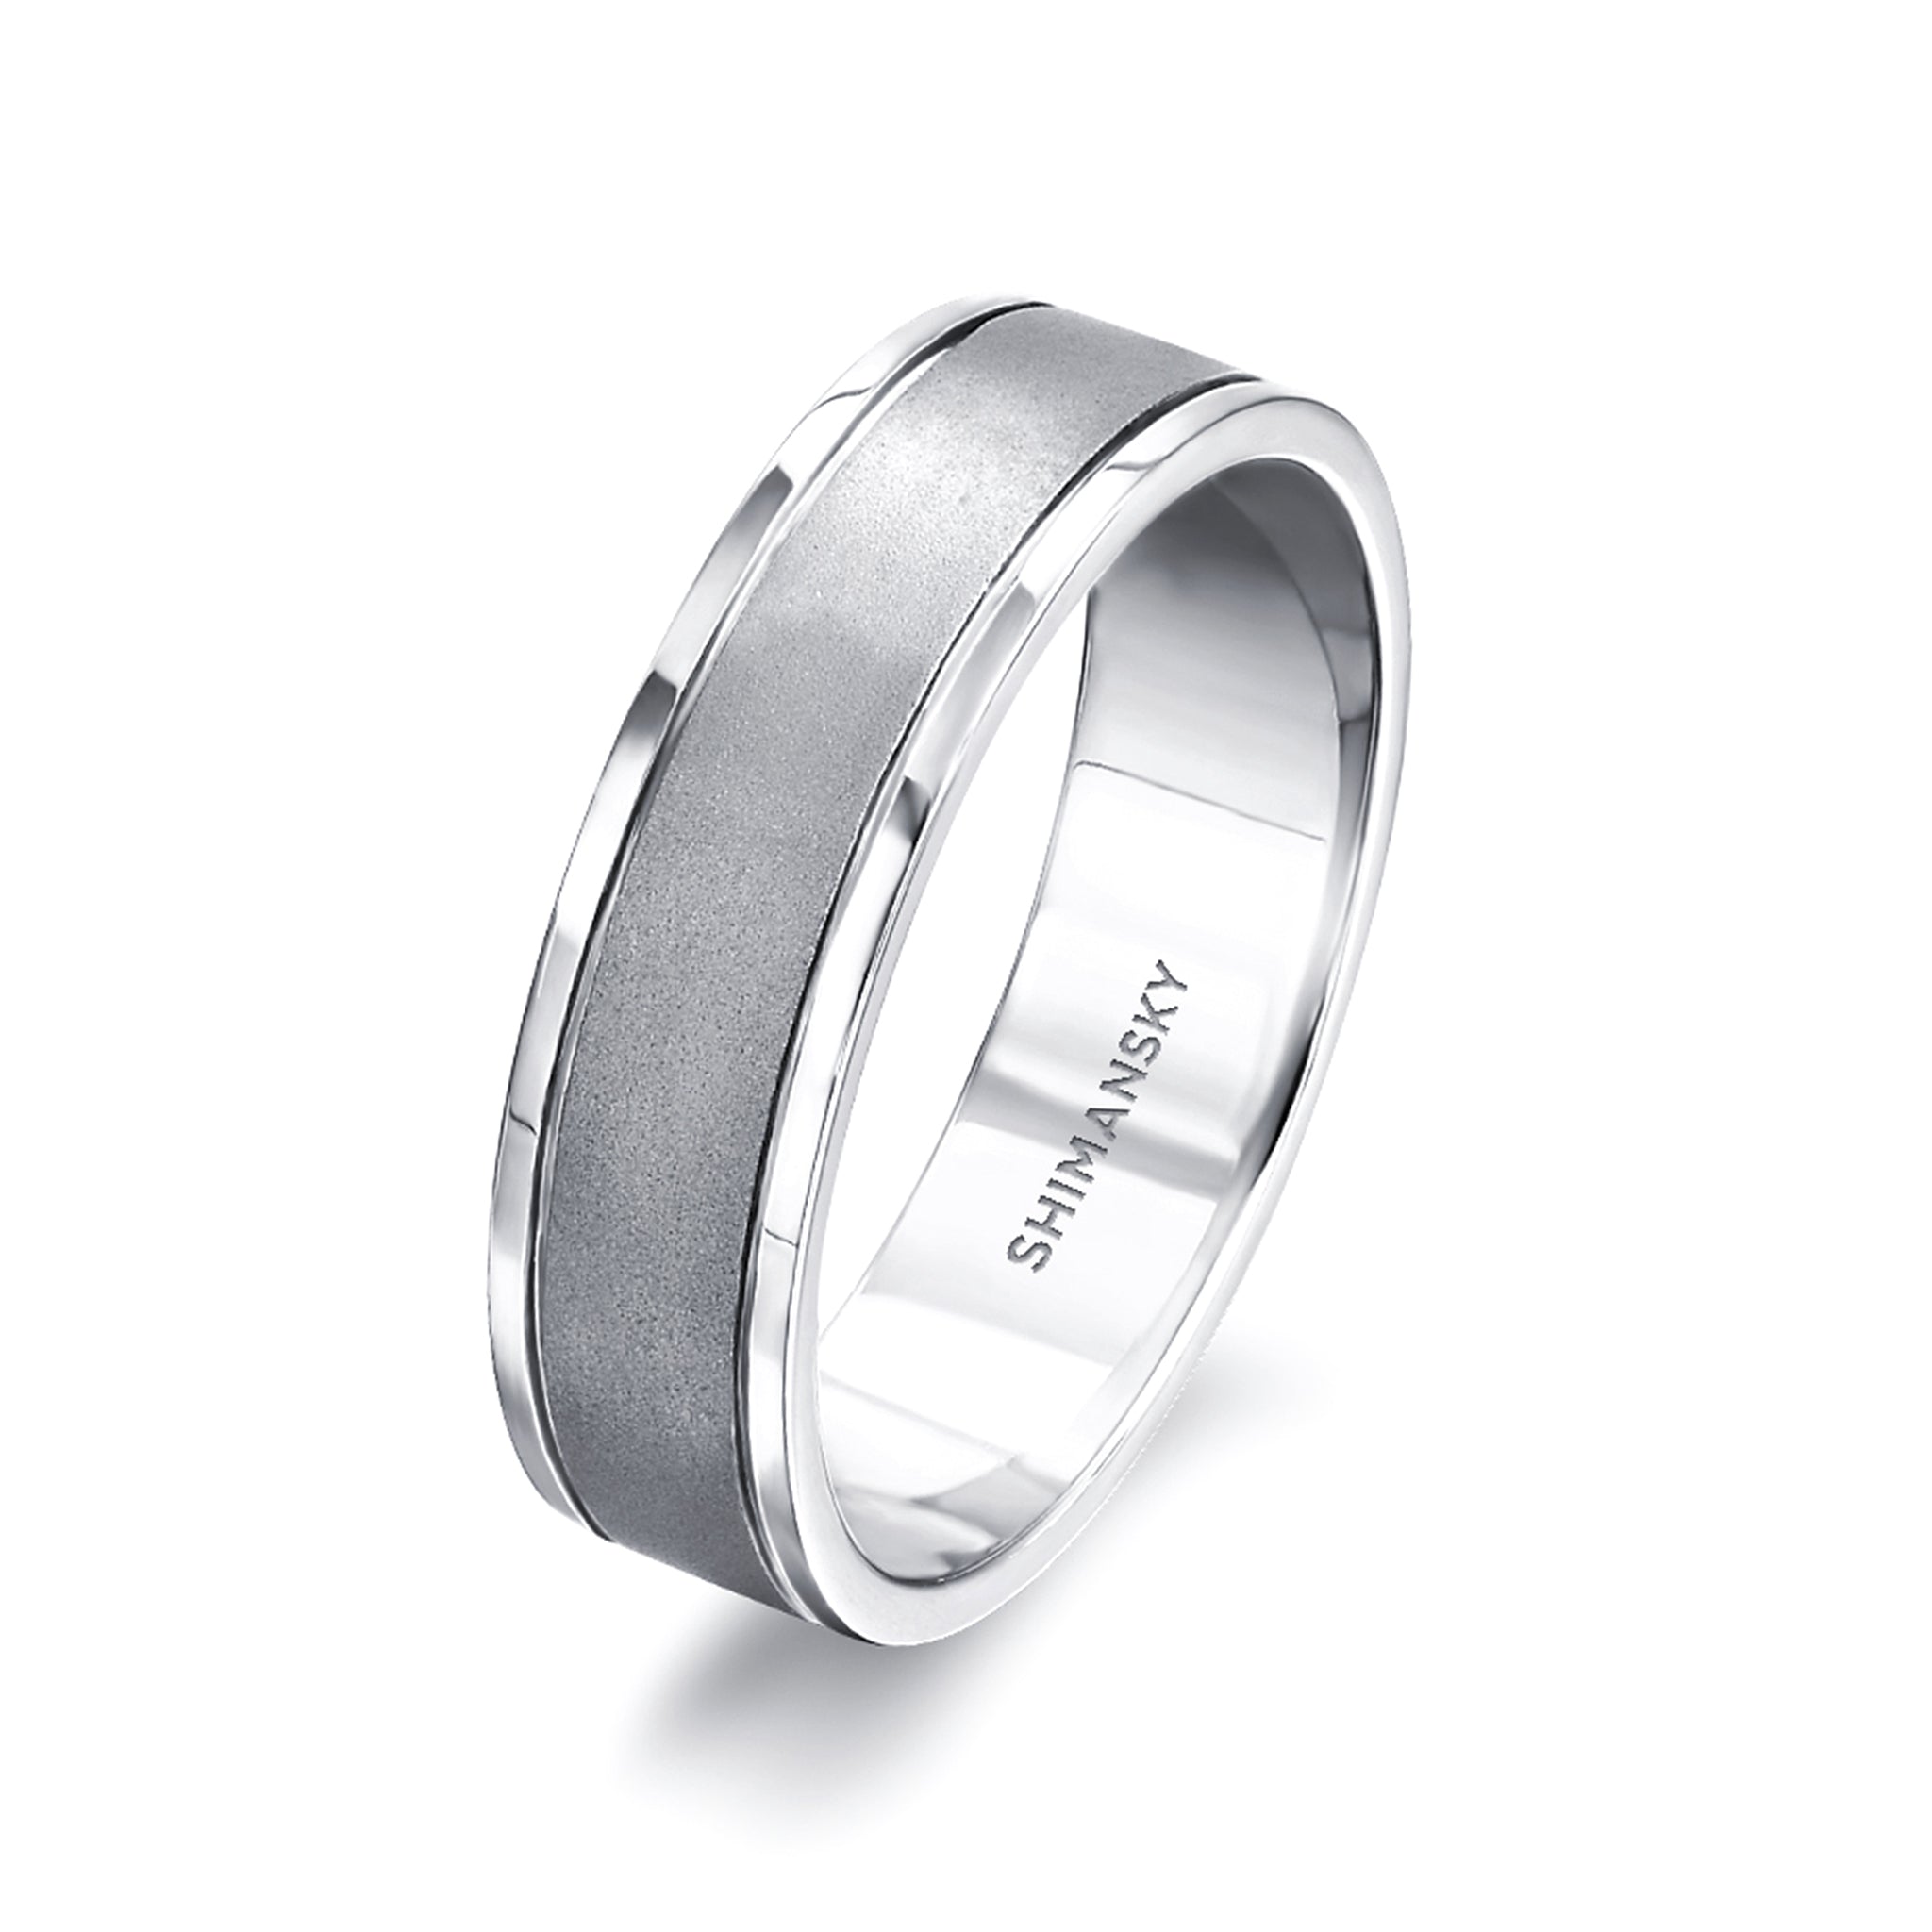 Shimansky - Max-line Double Grooved Wedding Band in Satin Finished Platinum